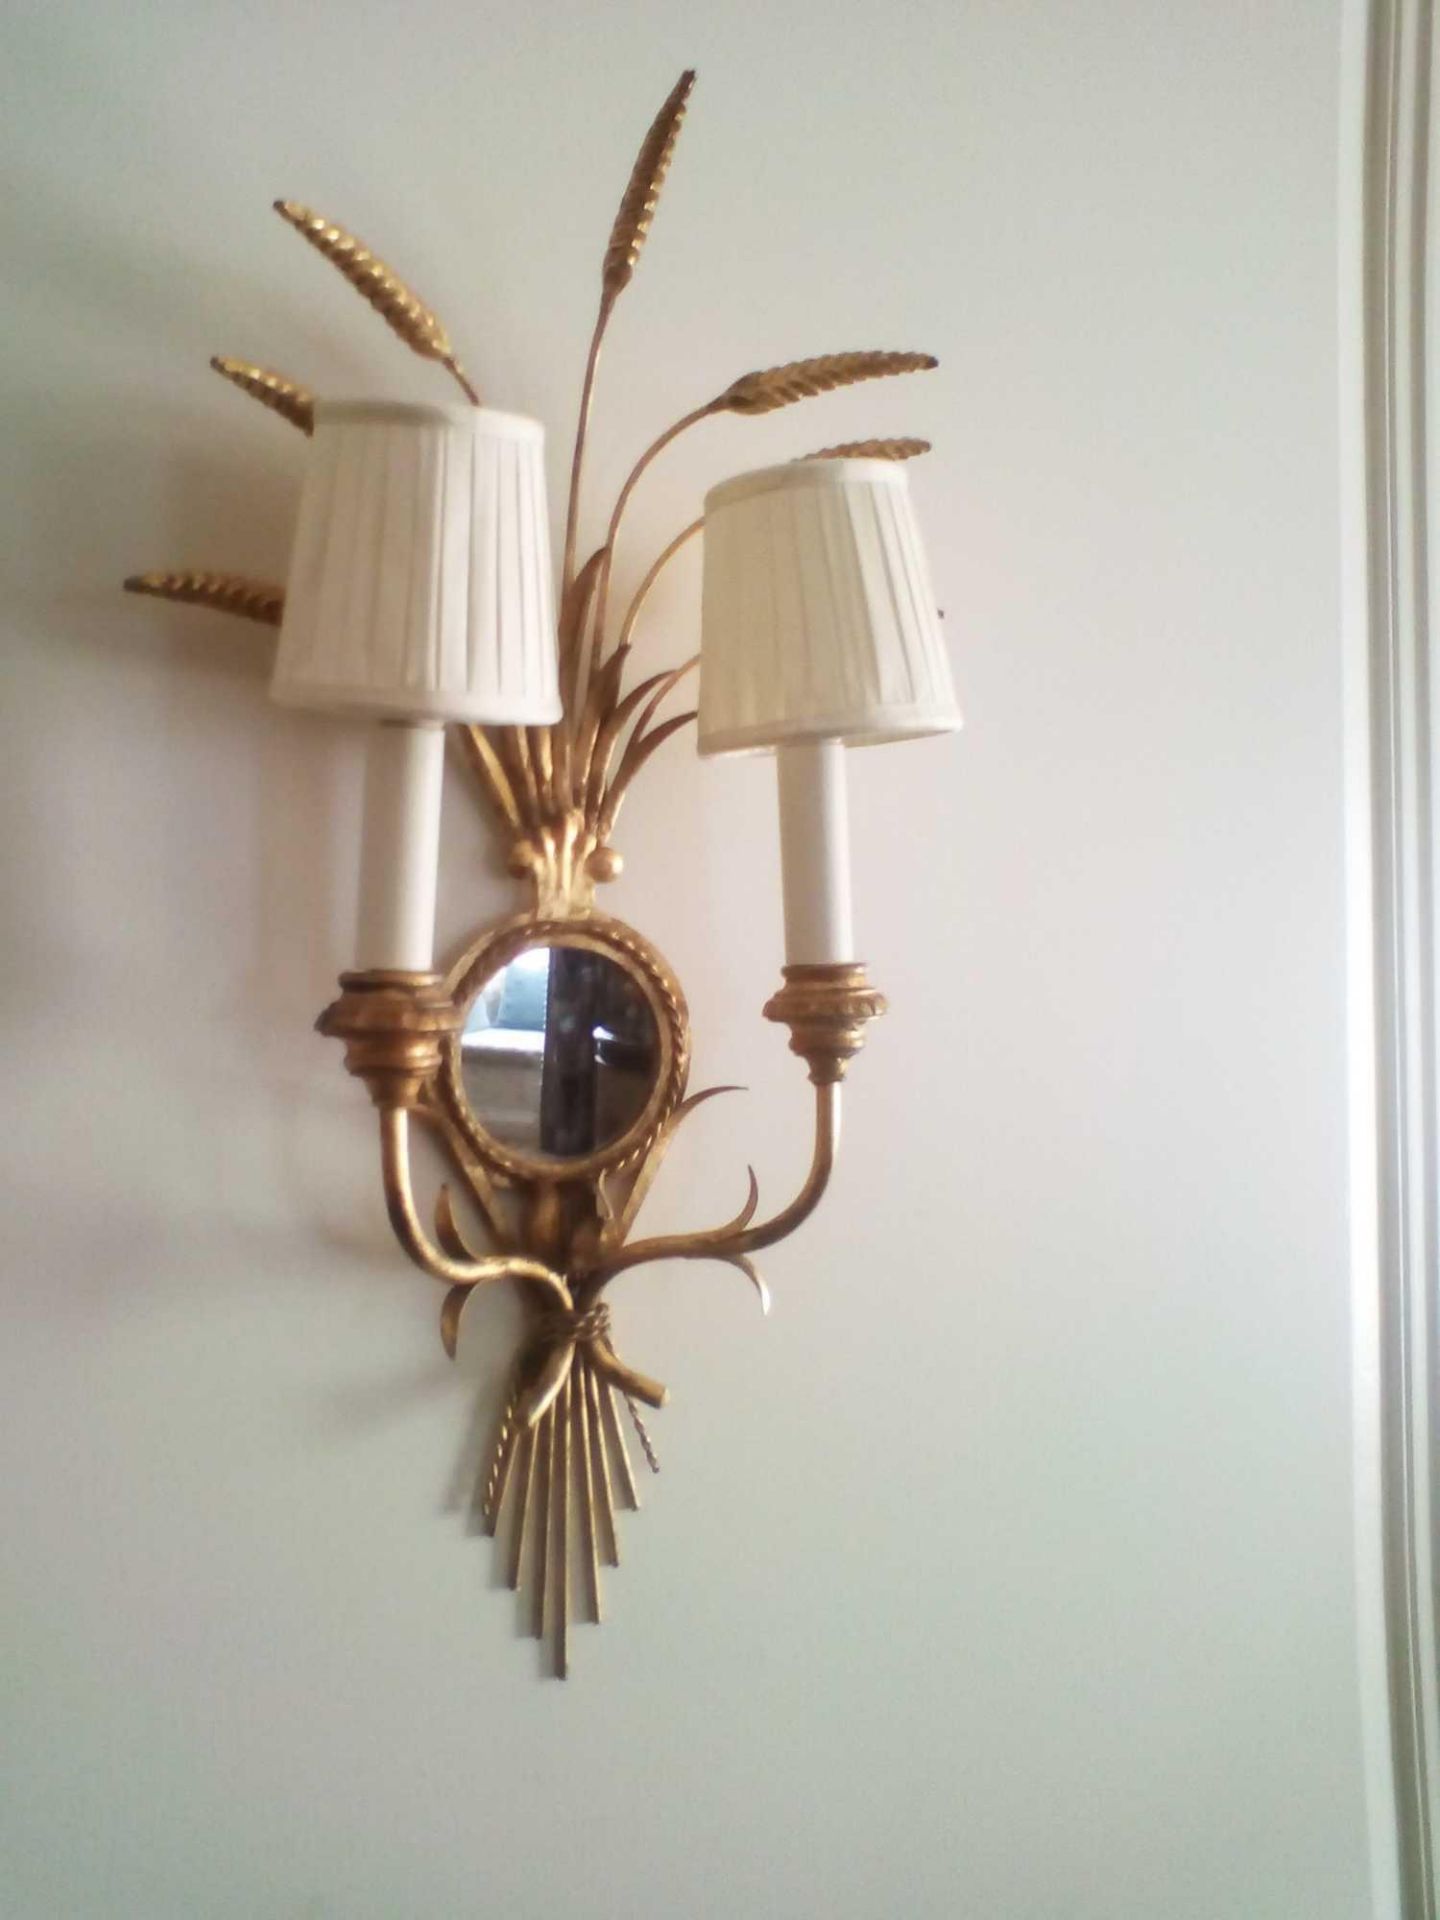 4 x Wall Appliques Twin Arm In A Elegant Wheatsheaf Motif And A Small Decorative Mirror Supported By